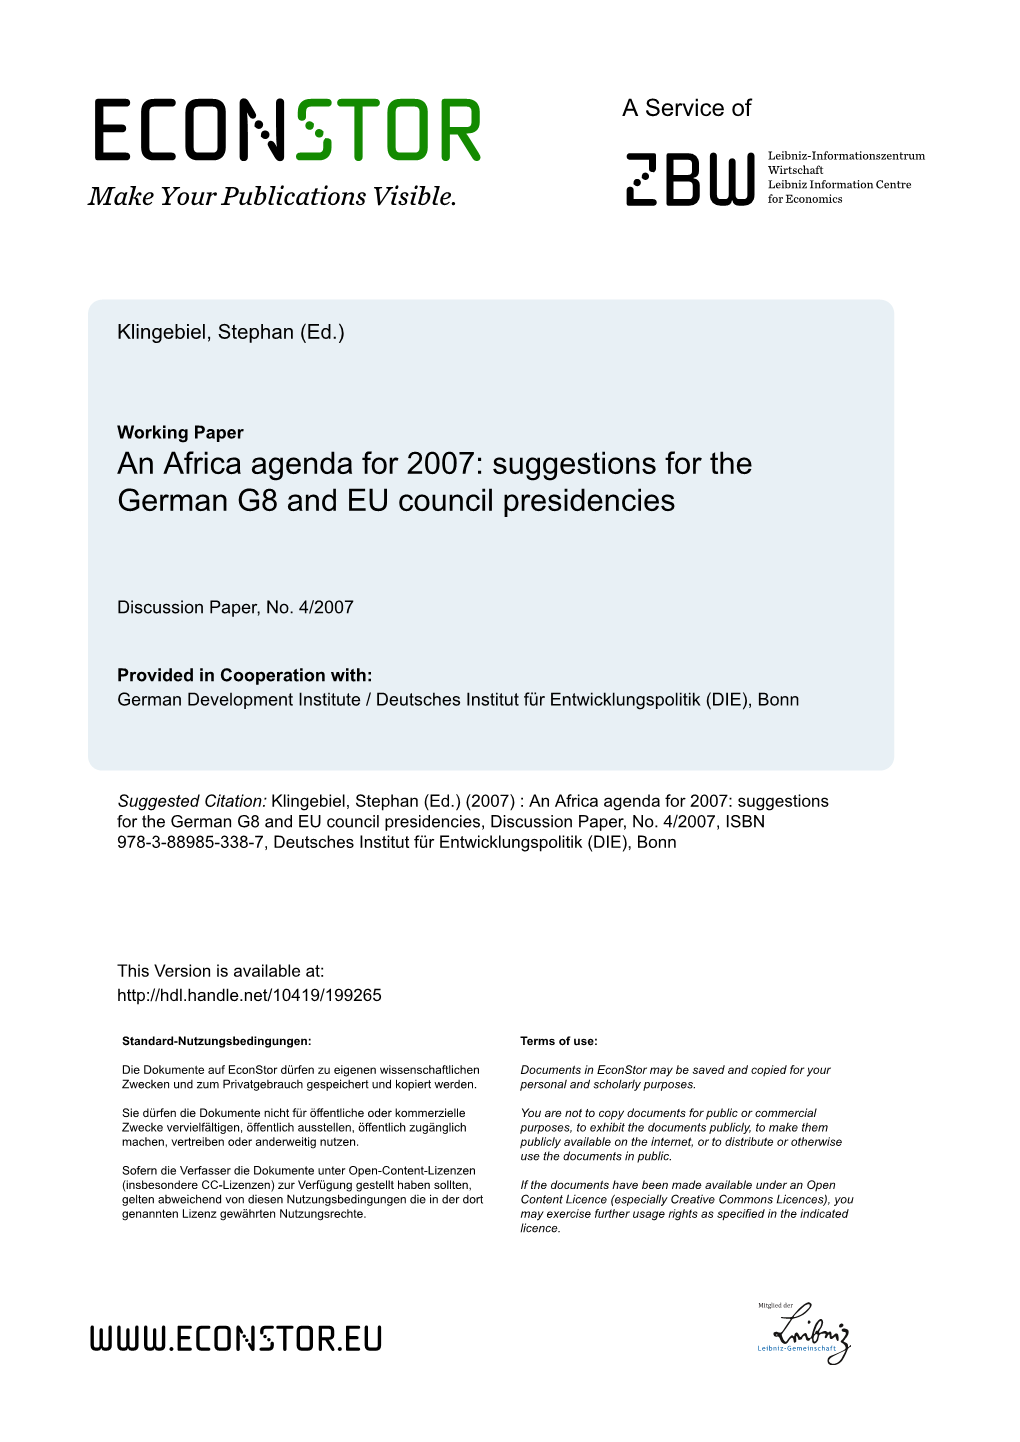 Africa Agenda for 2007: Suggestions for the German G8 and EU Council Presidencies